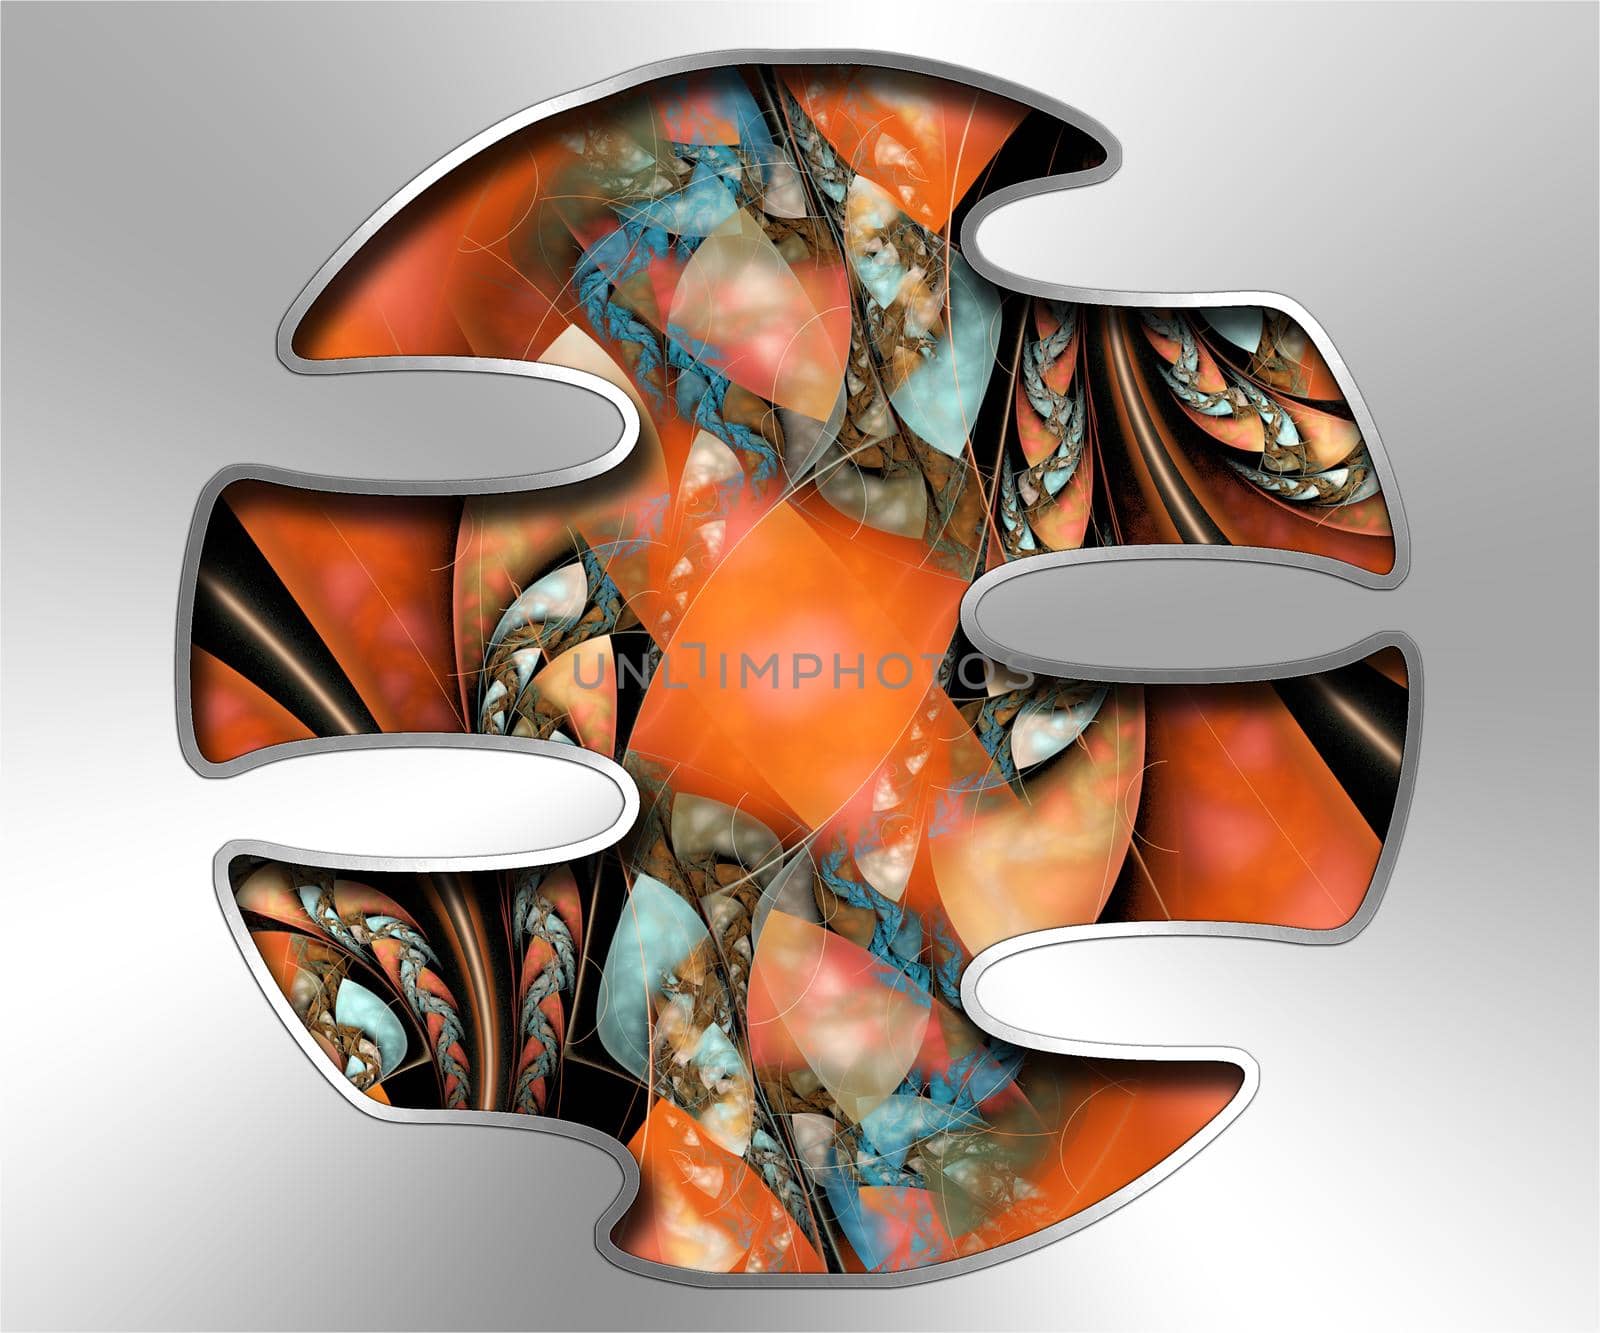 3D illustration of creative fractal artwork combined with silver metal plate embellishment